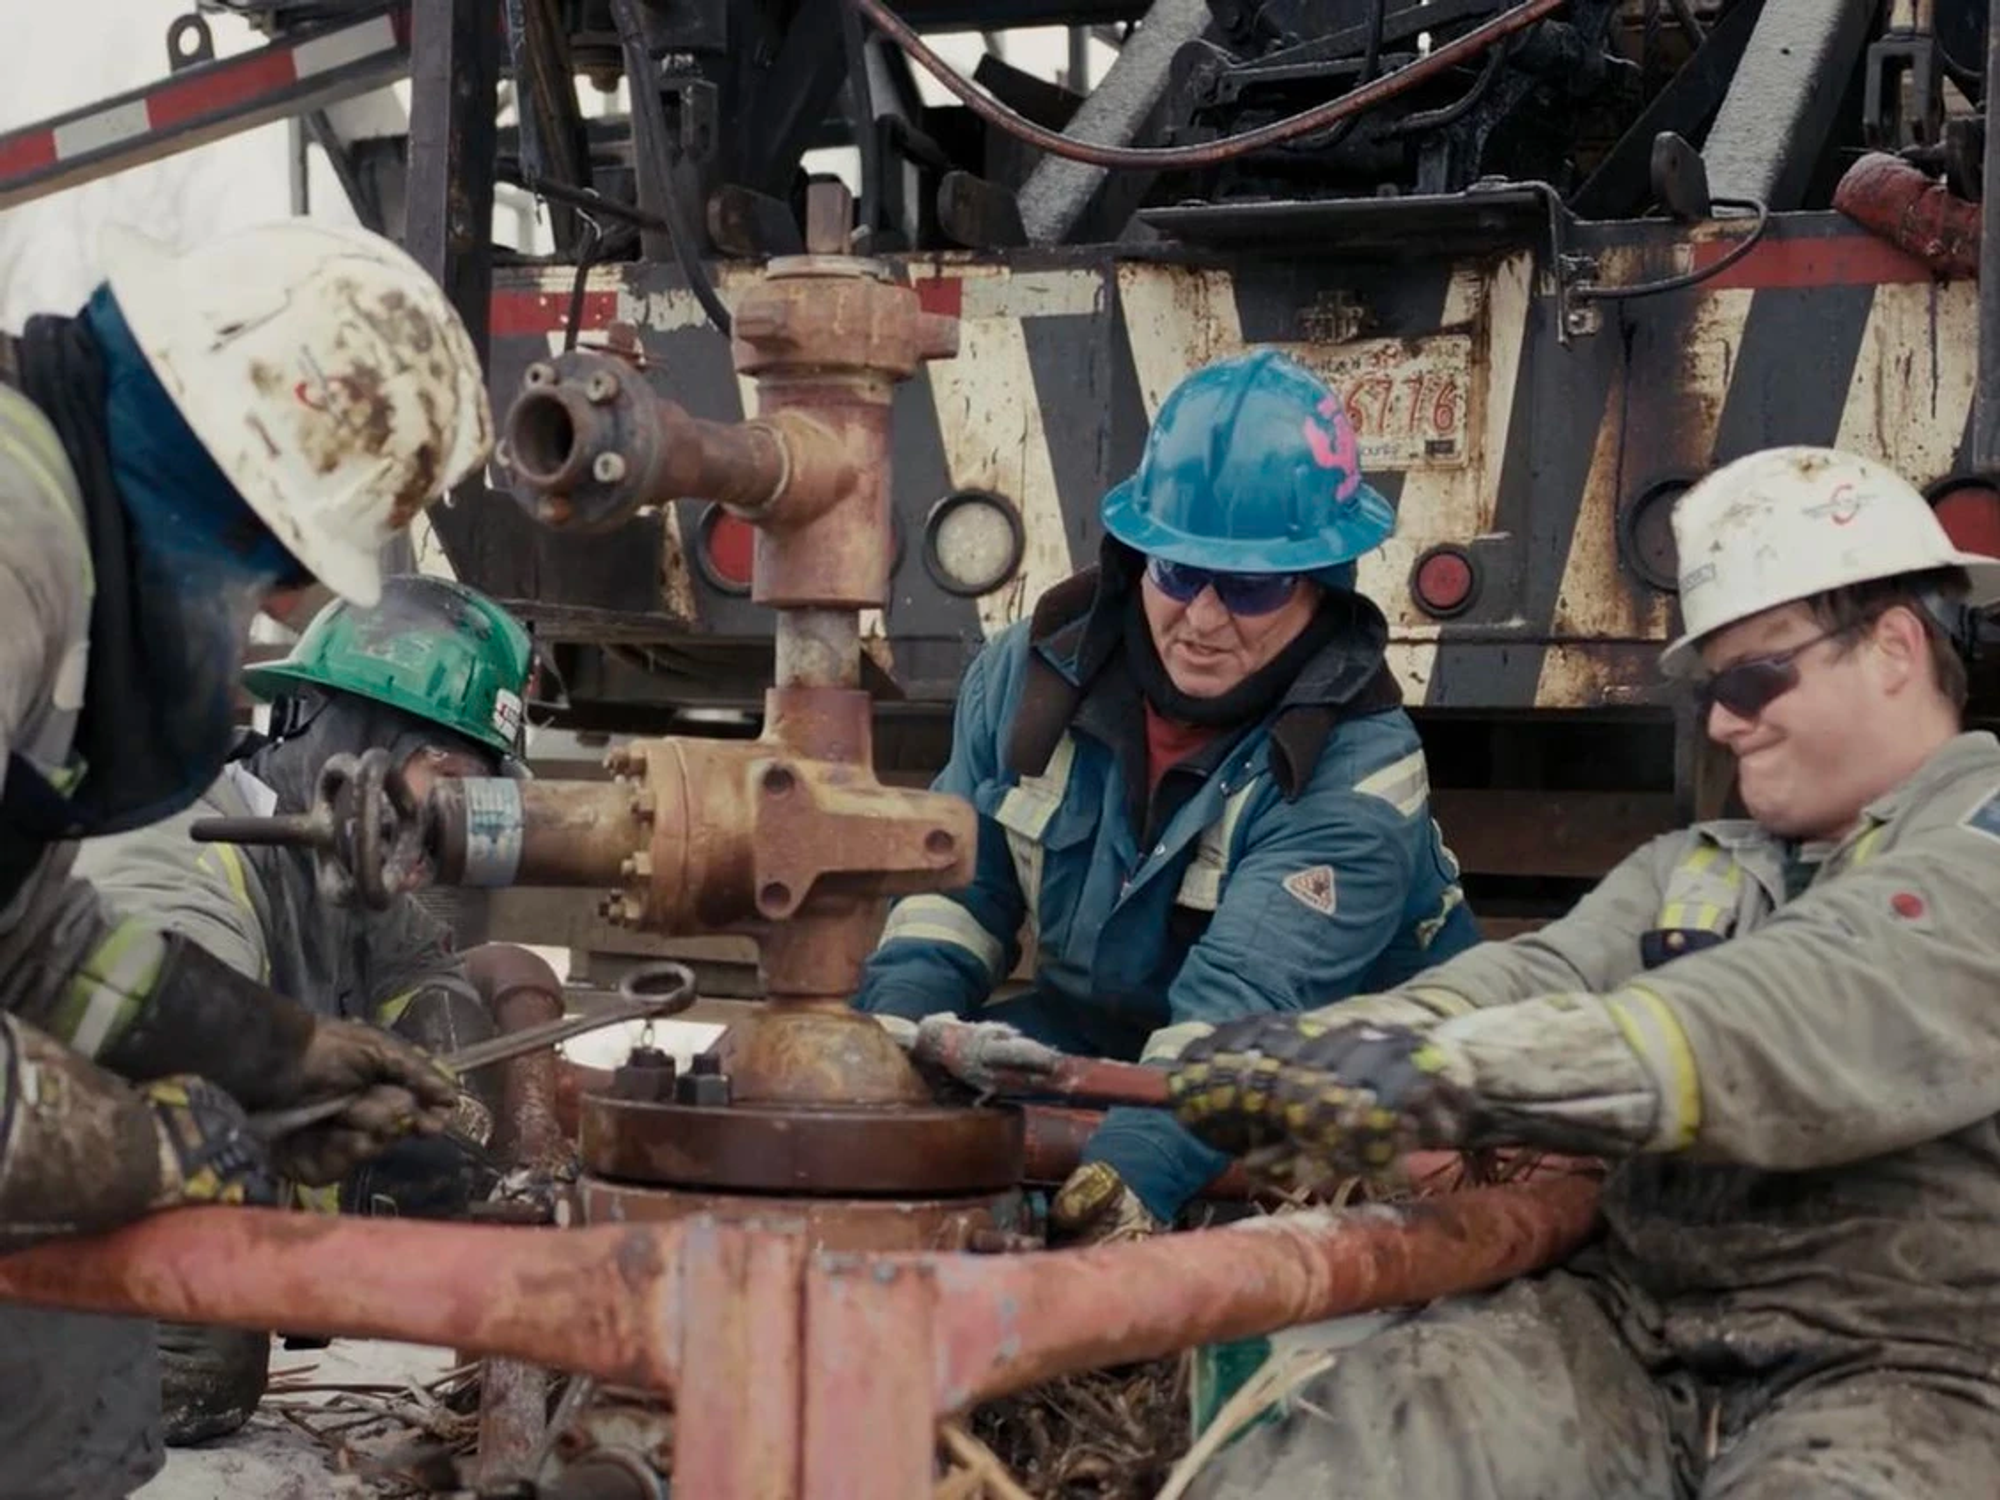 Former oil and gas engineer explores Alberta’s orphaned wells in new documentary